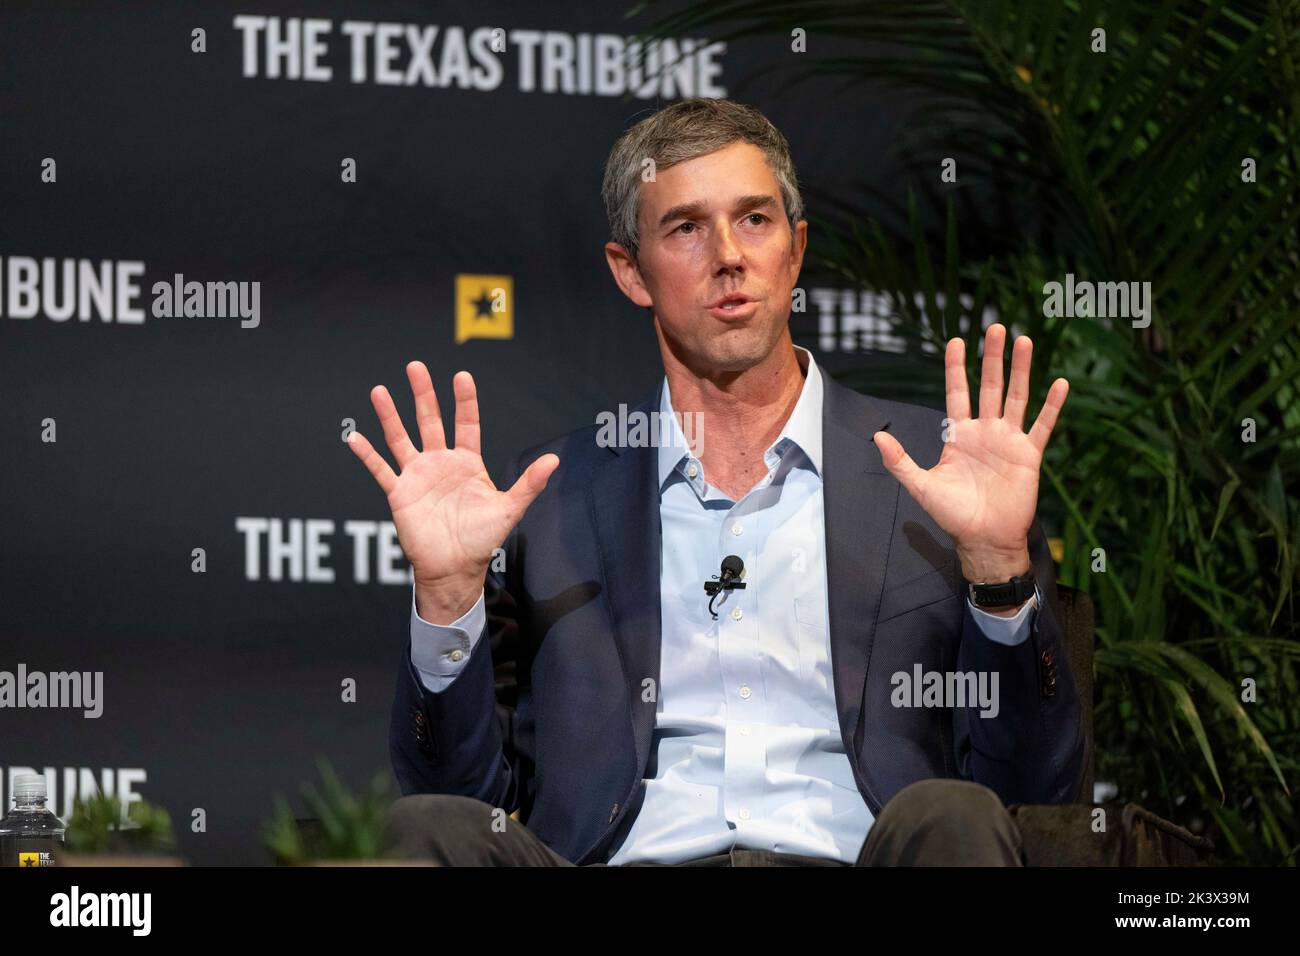 Democratic nominee for governor of Texas BETO O'ROURKE speaks during an interview session at the annual Texas Tribune Festival in downtown Austin on September 24, 2022.  O'Rourke is a former congressman from El Paso. Stock Photo